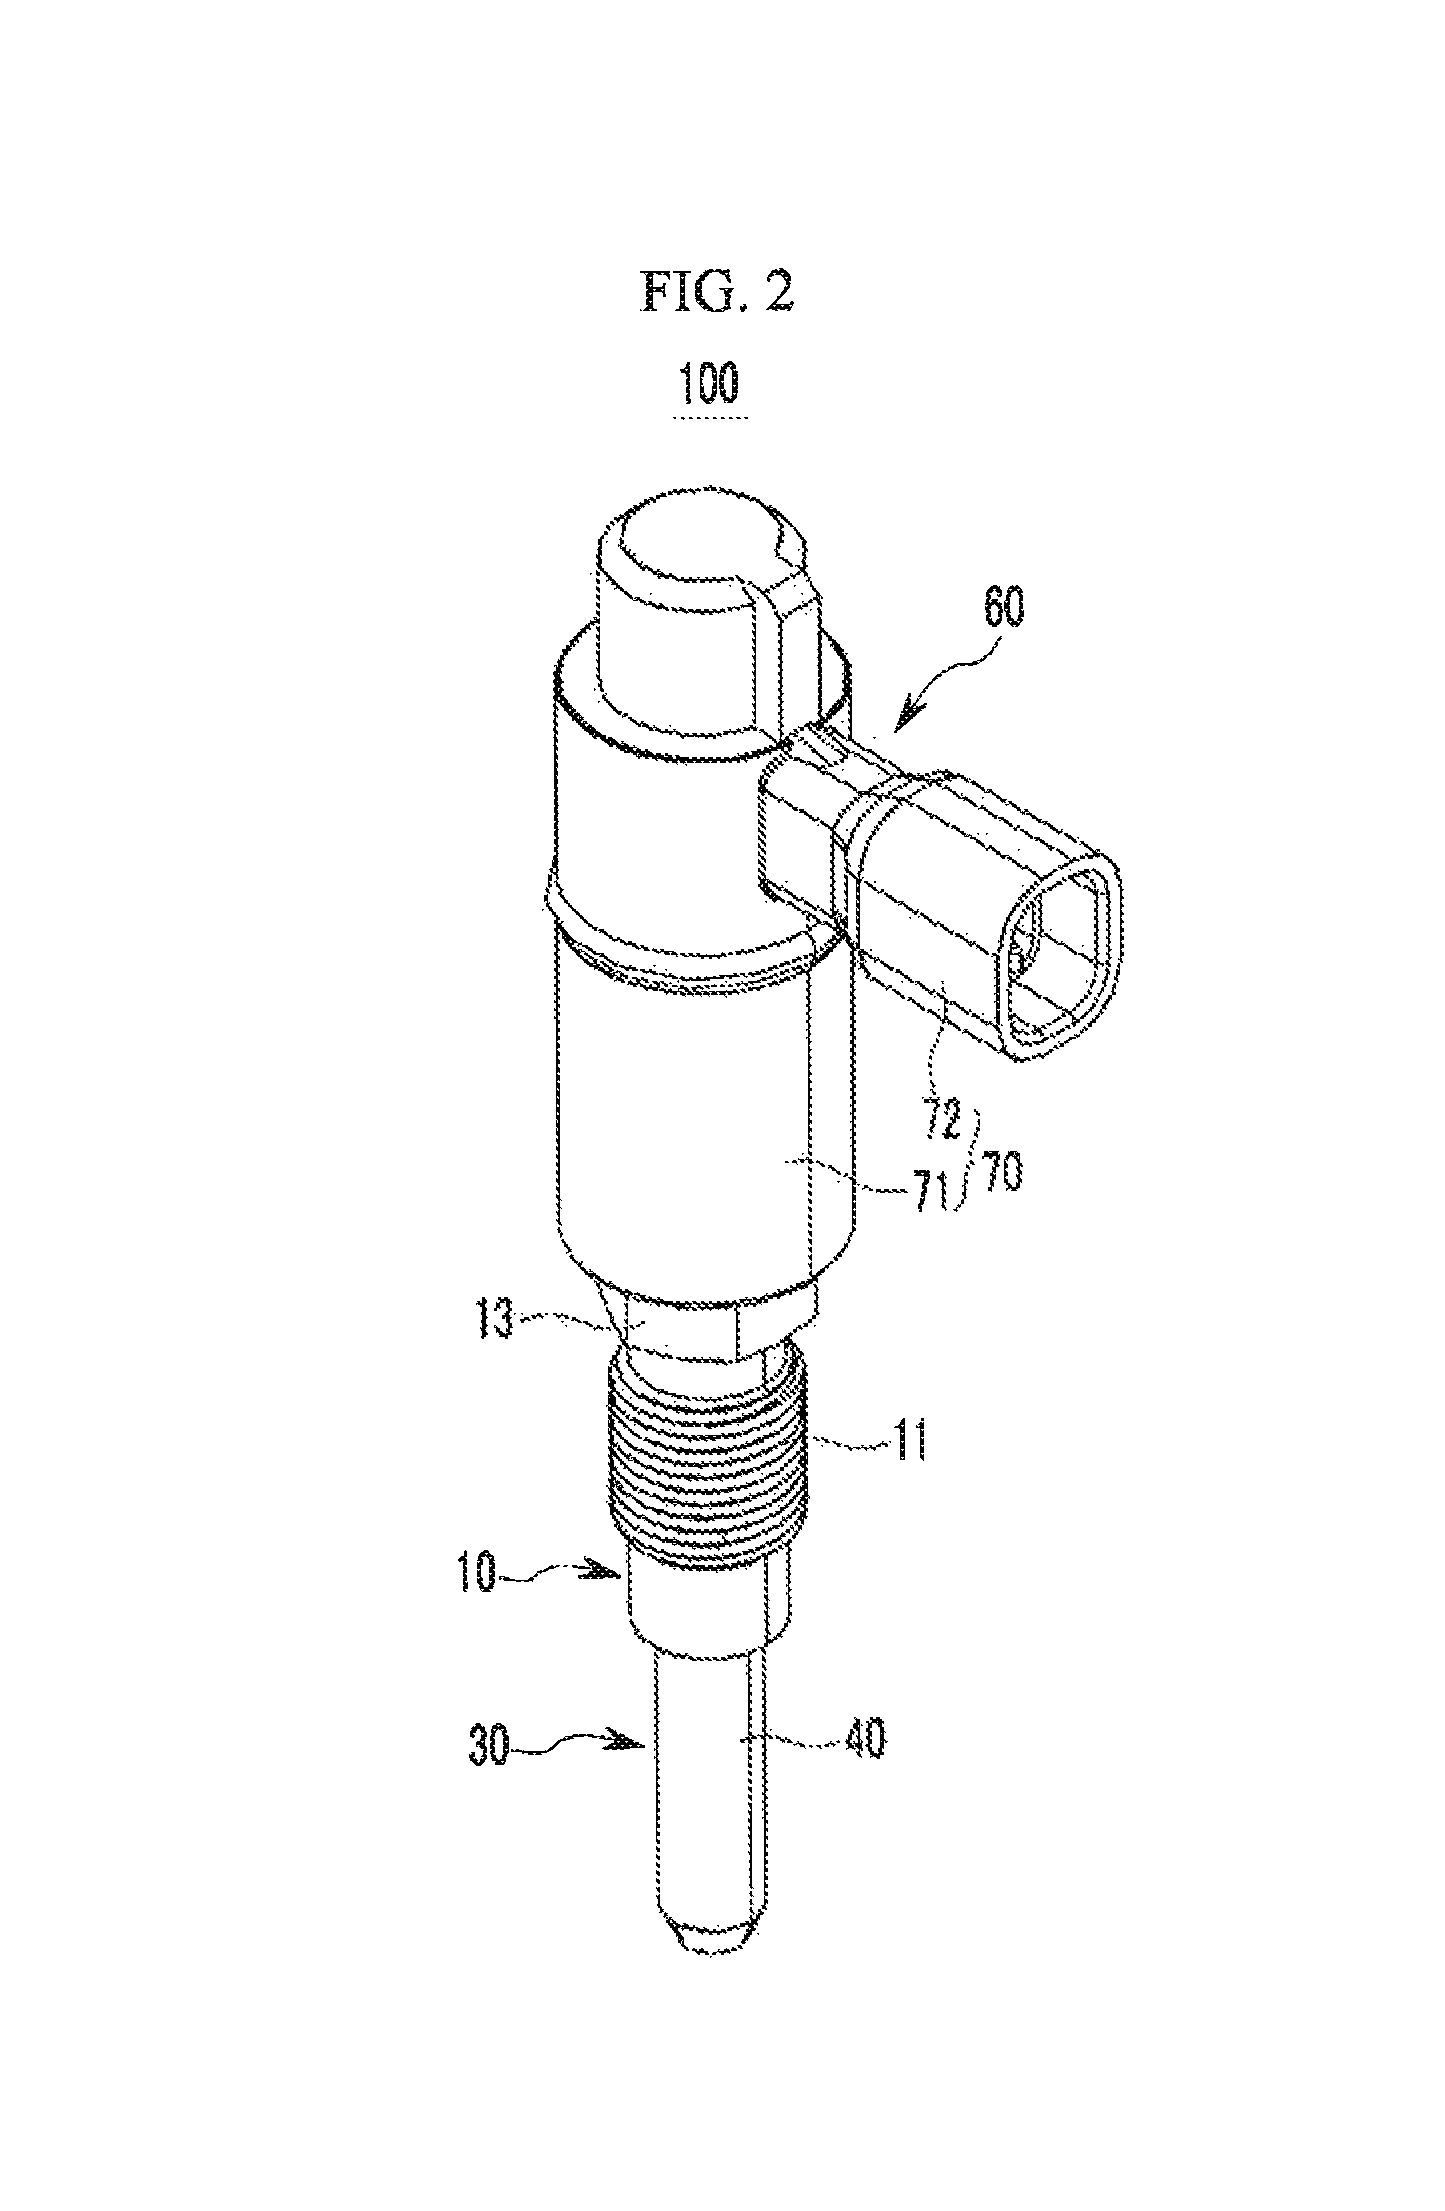 Glow plug and electric thermostat with the same